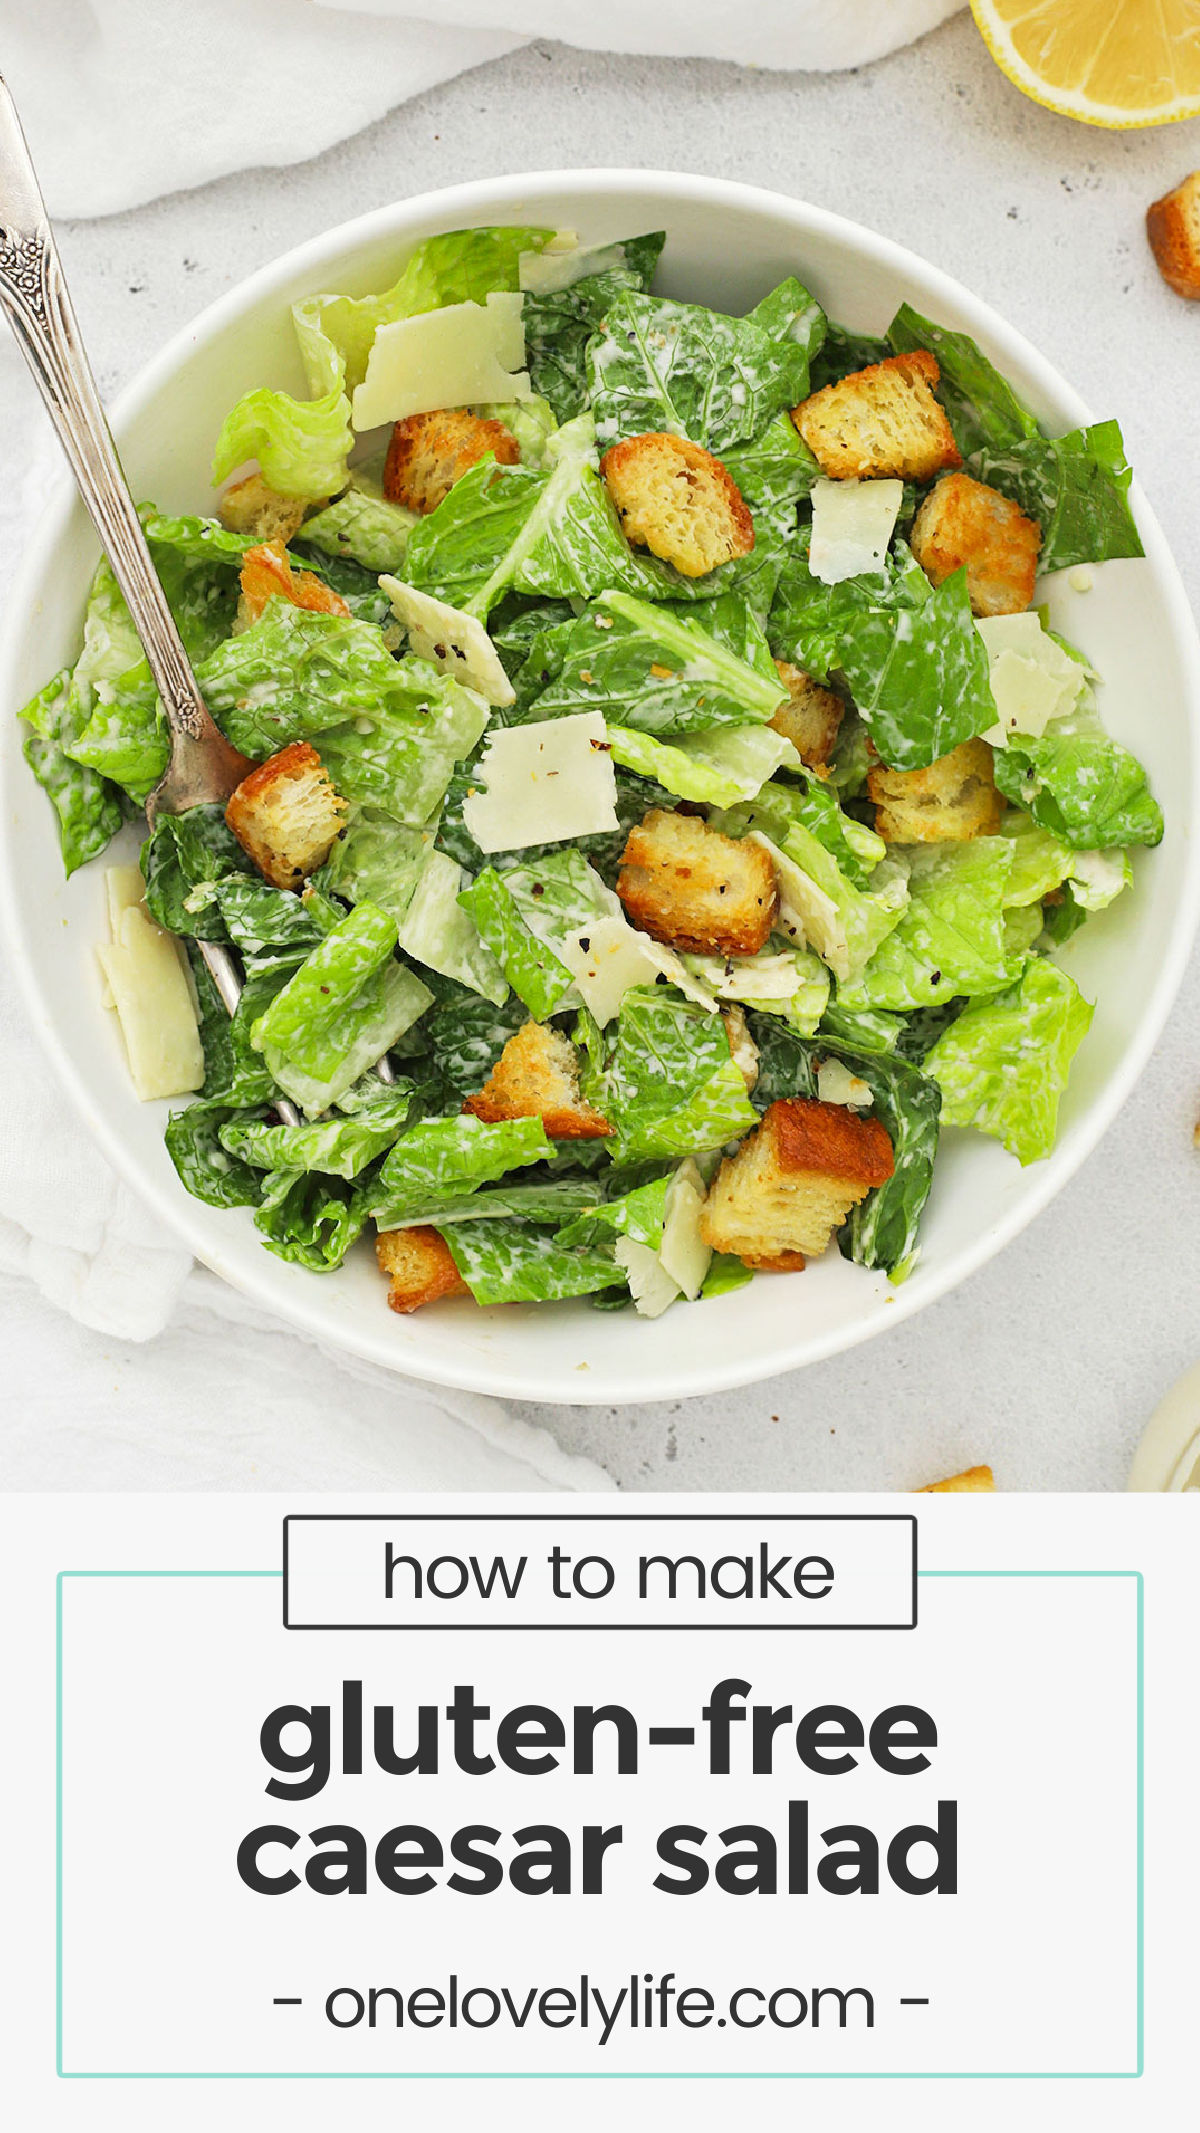 This Gluten-Free Caesar Salad recipe has all of the classic flavor you crave, simply made gluten-free! Enjoy as a side or upgrade to a main dish with one of our tricks! // easy gluten free caesar salad / gluten free caesar salad recipe / gluten free side salad / gluten free caesar dressing / gluten free salad recipes / side salad / gluten free croutons / gluten free romantic dinner / gluten free side dish / gluten free steak dinner ideas /